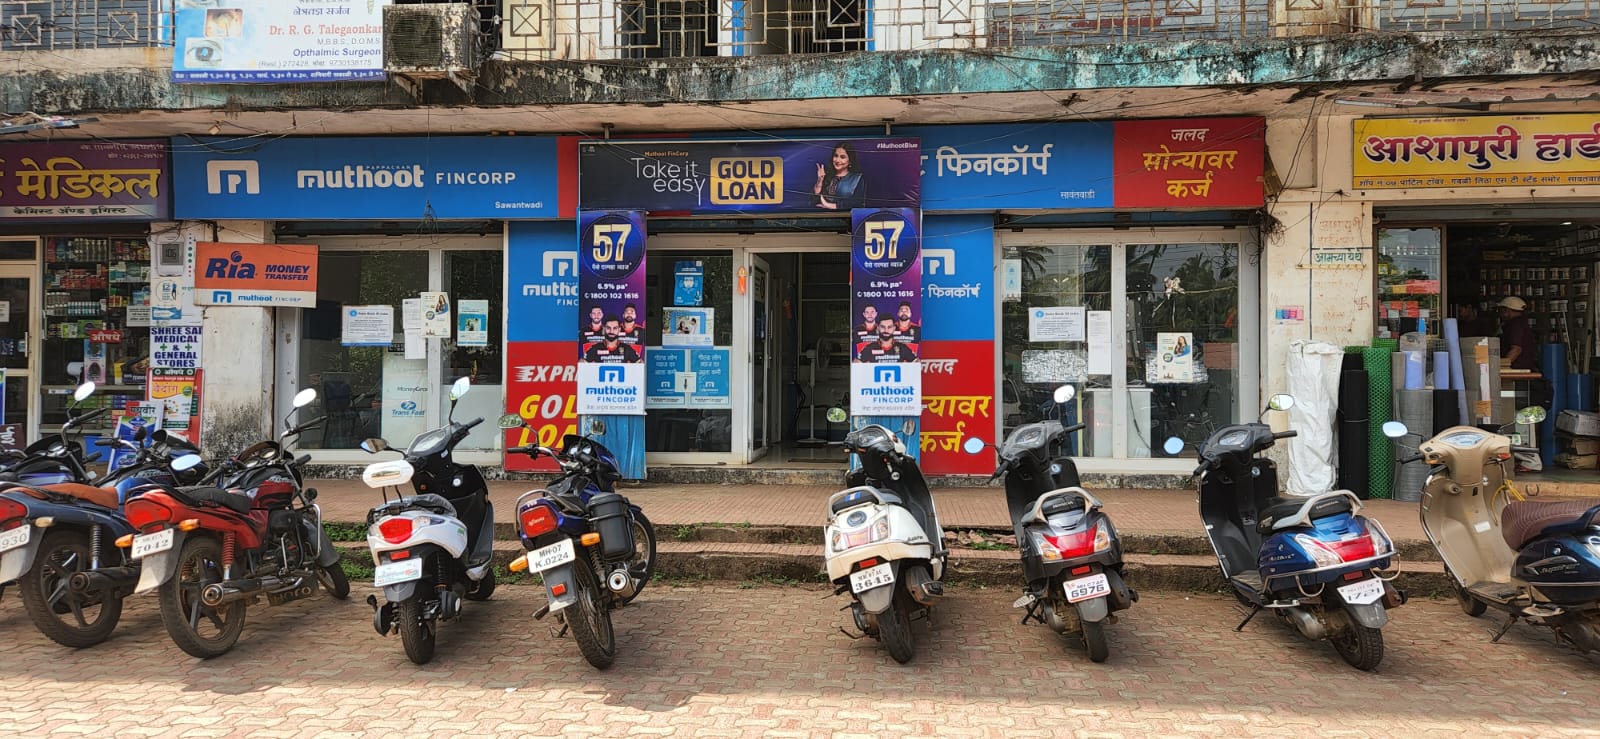 Photos and Videos of Muthoot Fincorp Gold Loan in Sawantwadi, Sindhudurg